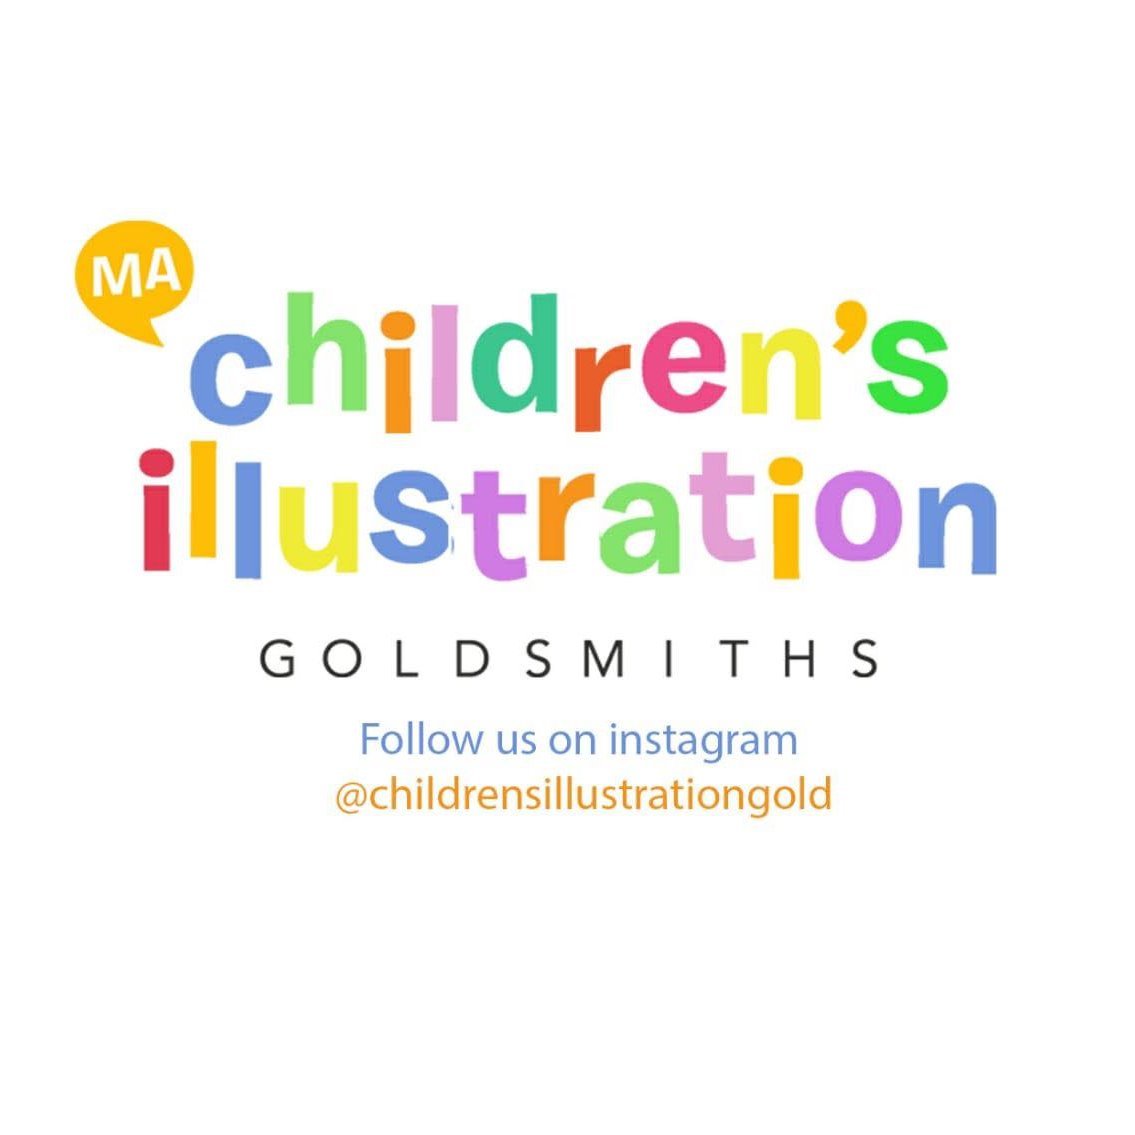 Artists who love picture books and learning! @goldsmithsUol Inspire us be inspired 🌱